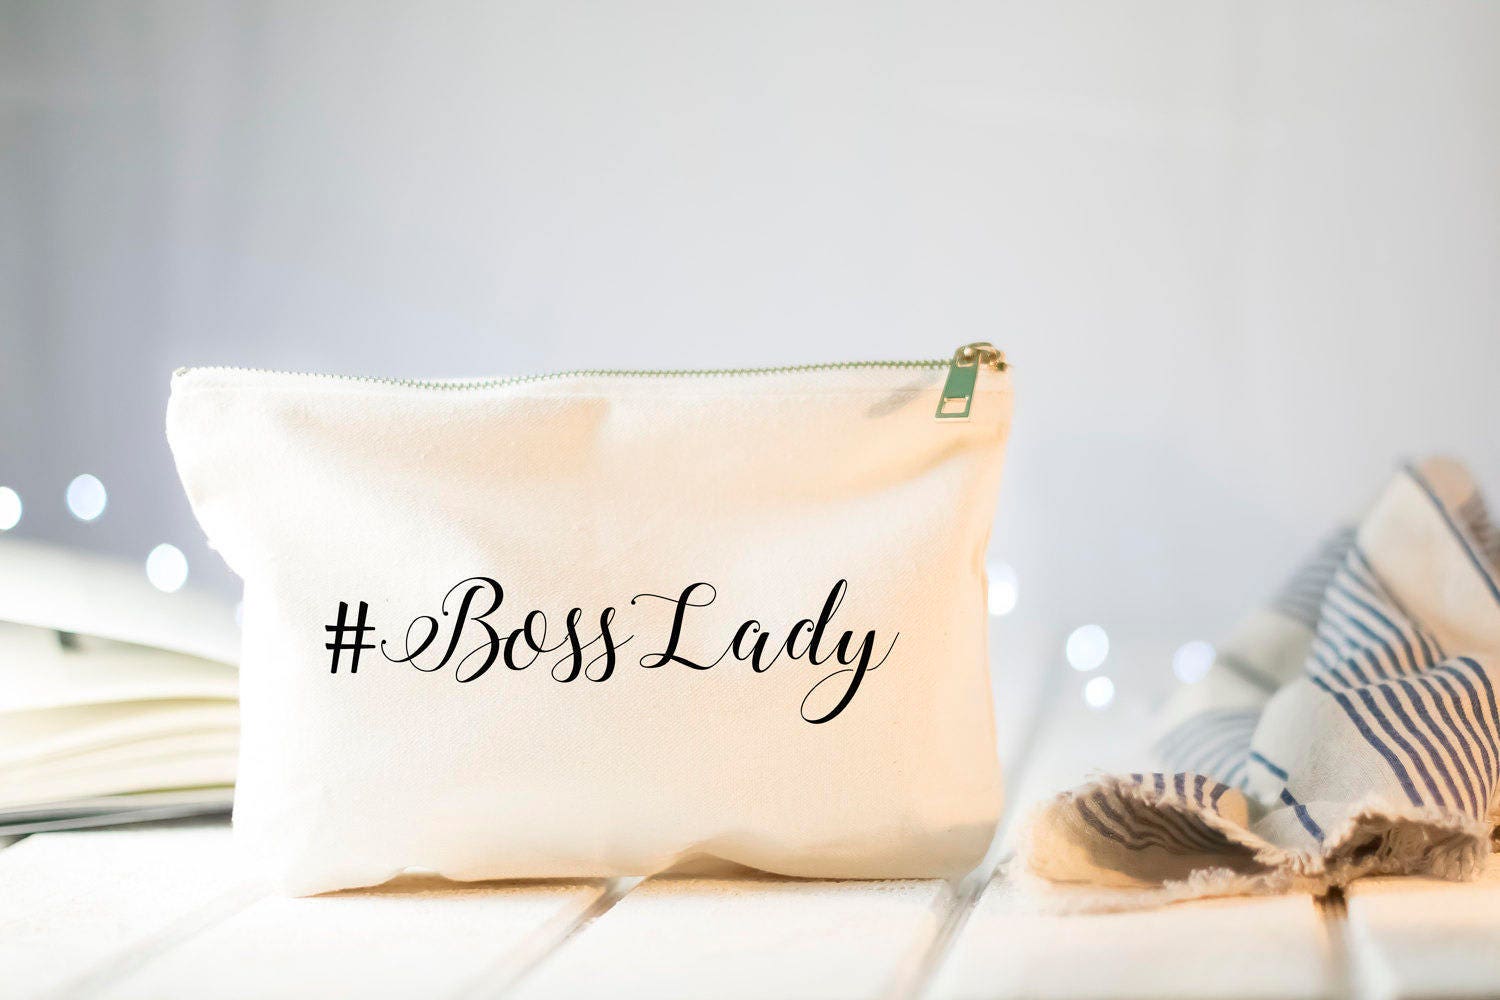 Hashtag Makeup Bag - boss lady, gift for her, makeup case, entrepreneur, best friend gift, cosmetic bag, pencil case, gift for boss